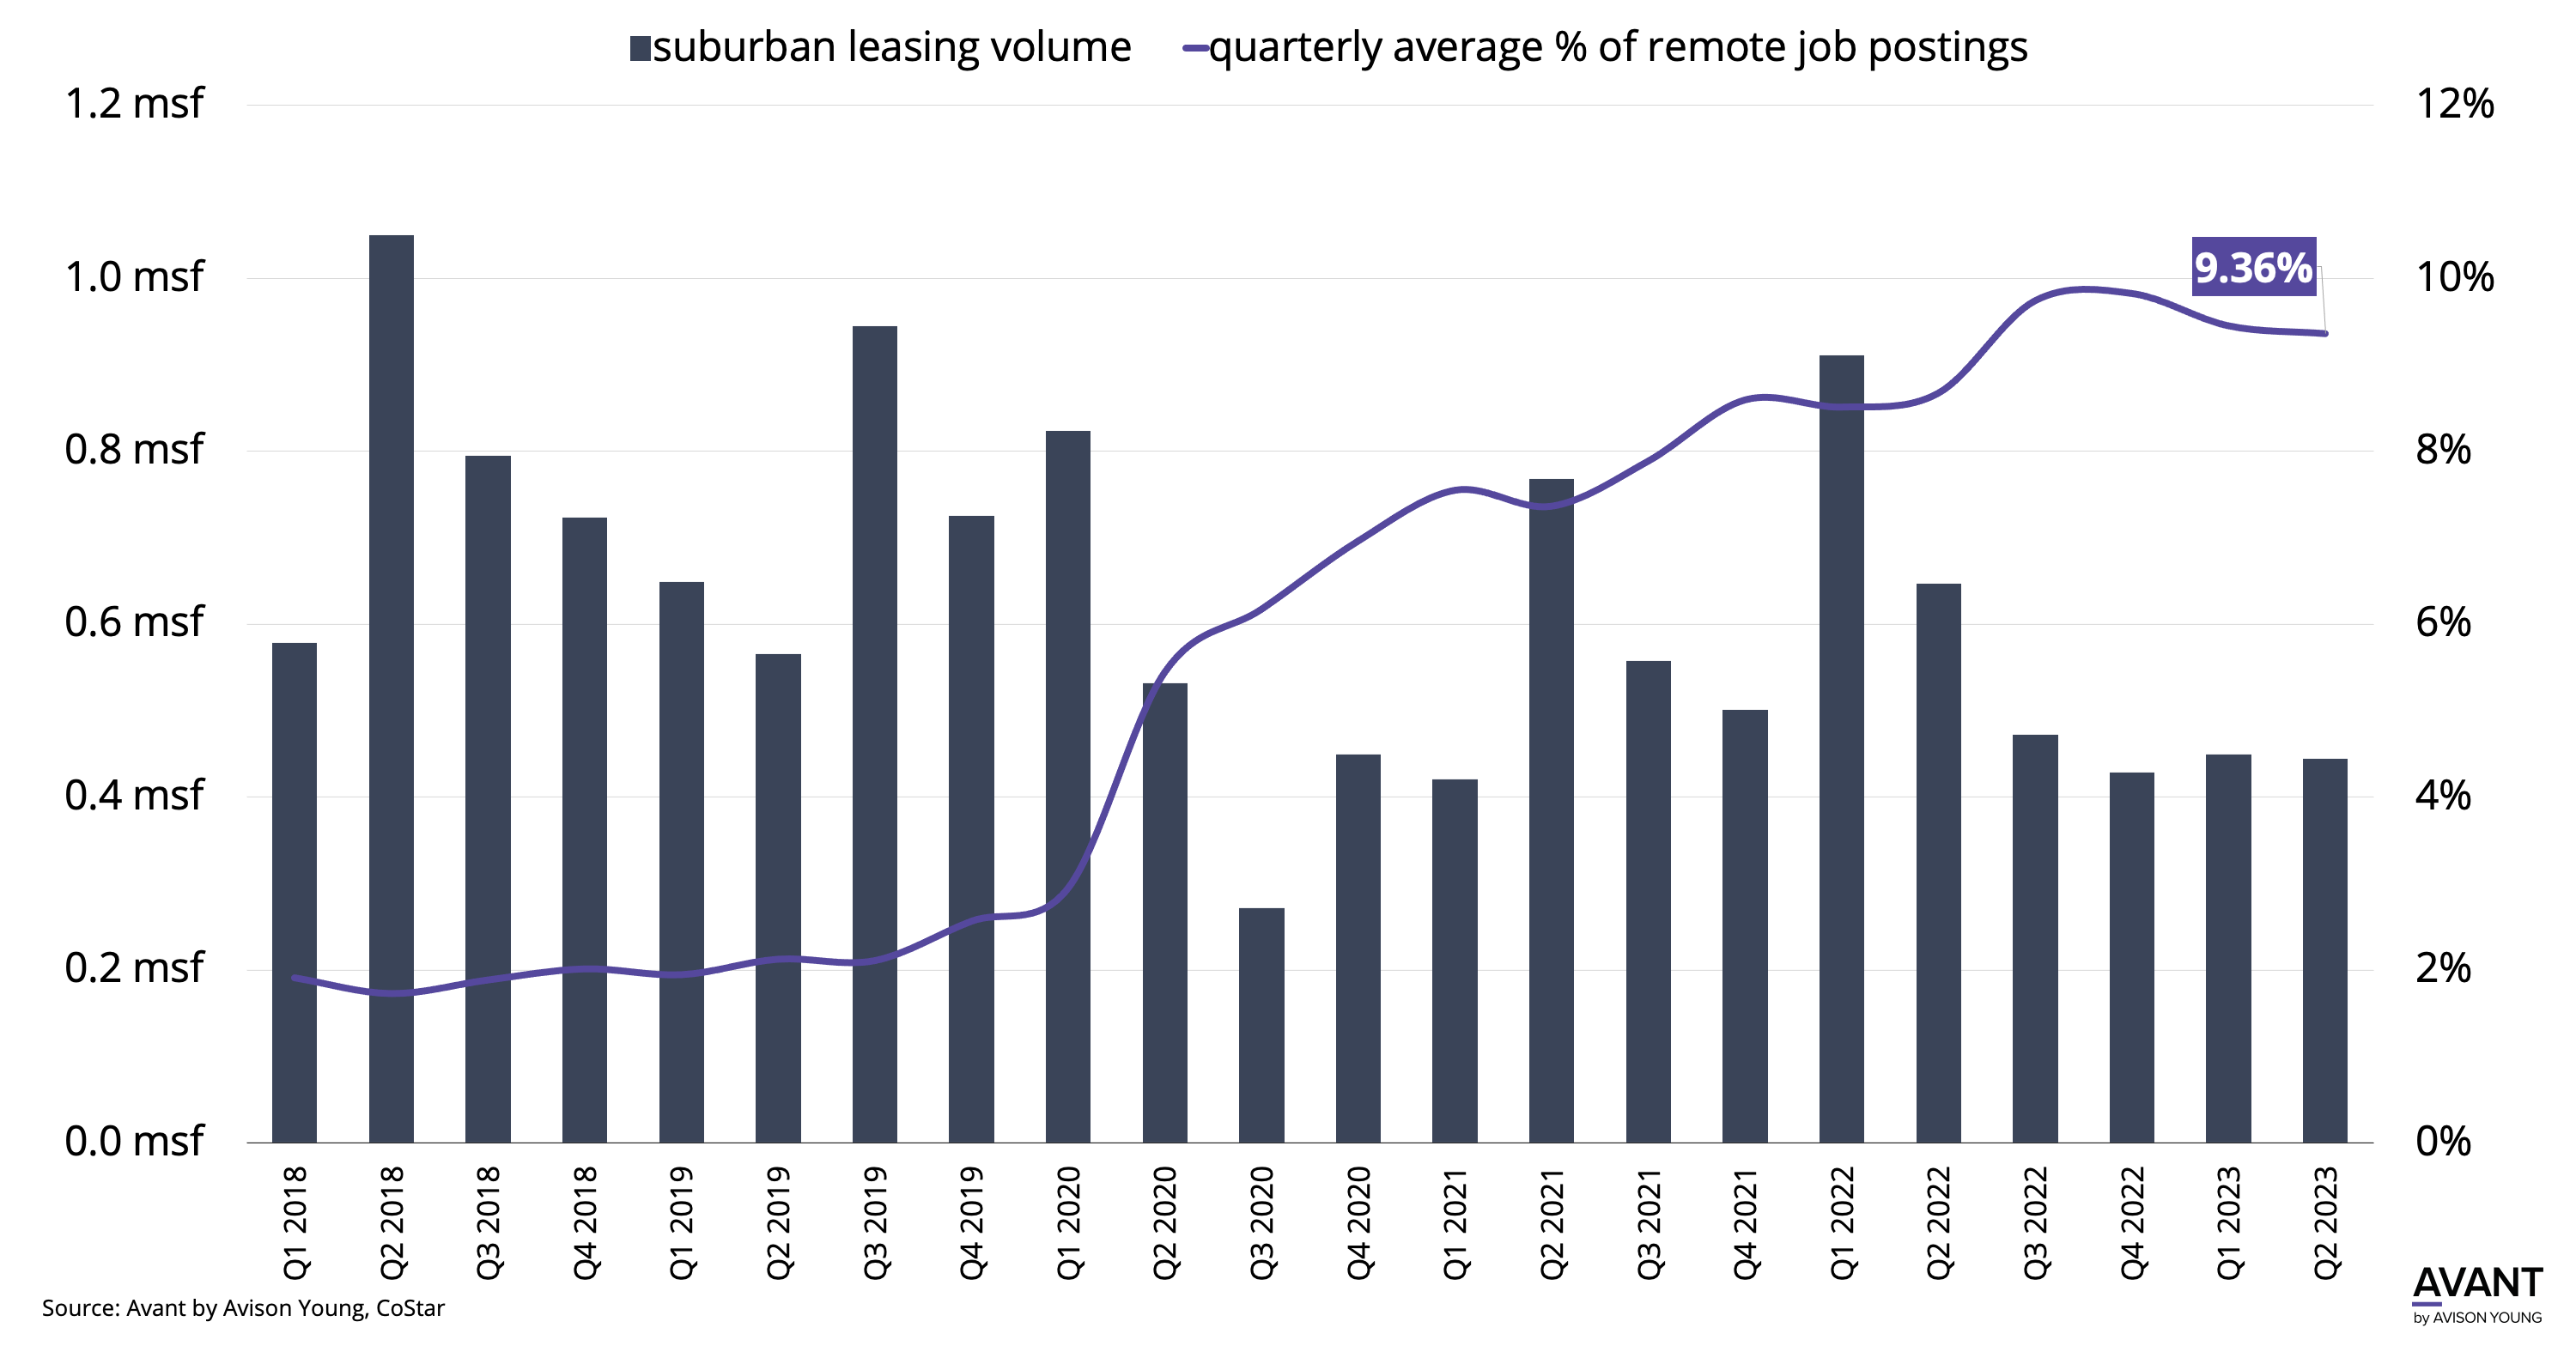 Graph of Raleigh-Durham suburban office leasing and quarterly percent of remote job postings